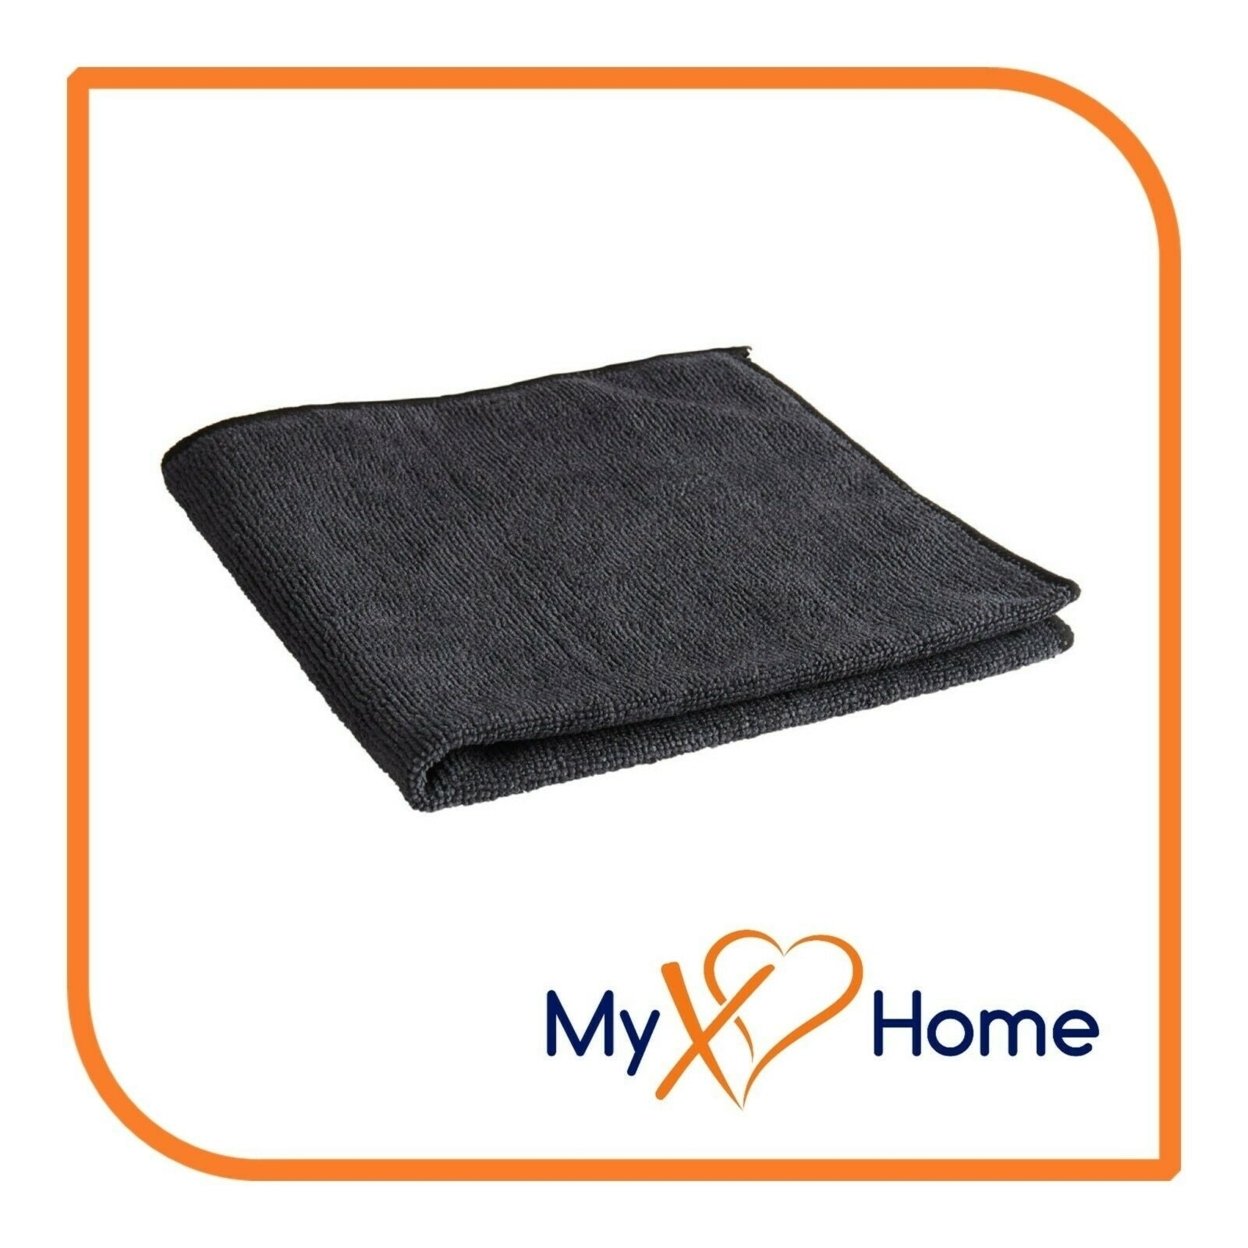 12 x 12 Black Microfiber Towel by MyXOHome - j) 120 Towels, XOH-CLE-TOW-MIC-1250x120